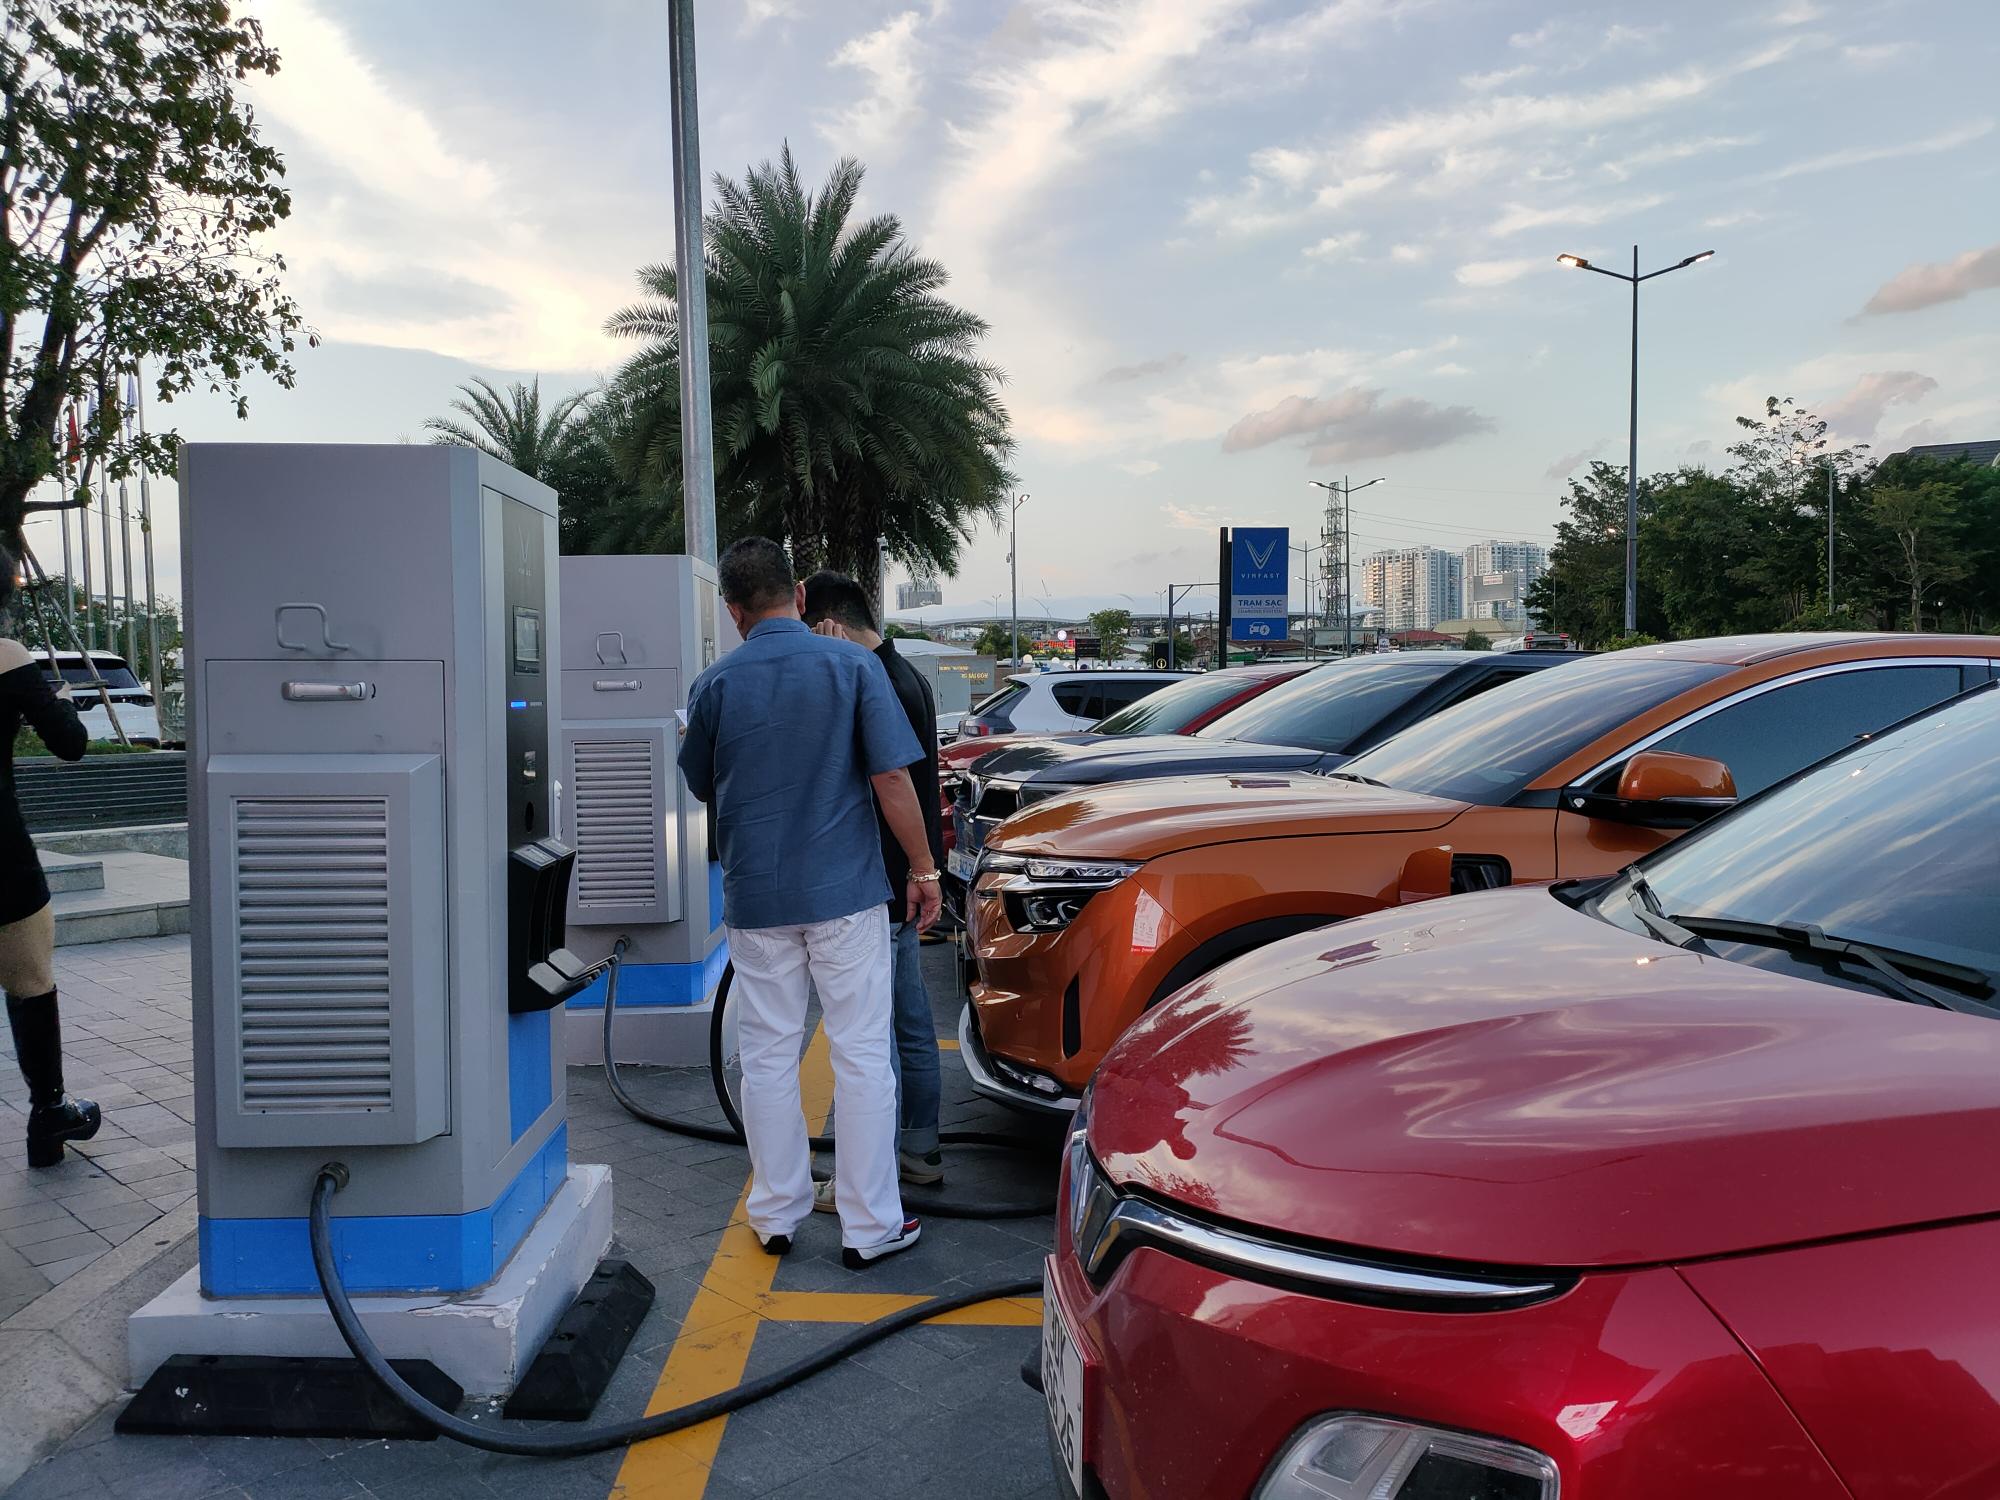 Charging stations and electric cars from Vinfast, the local car manufacturer, Bellecapital 2023